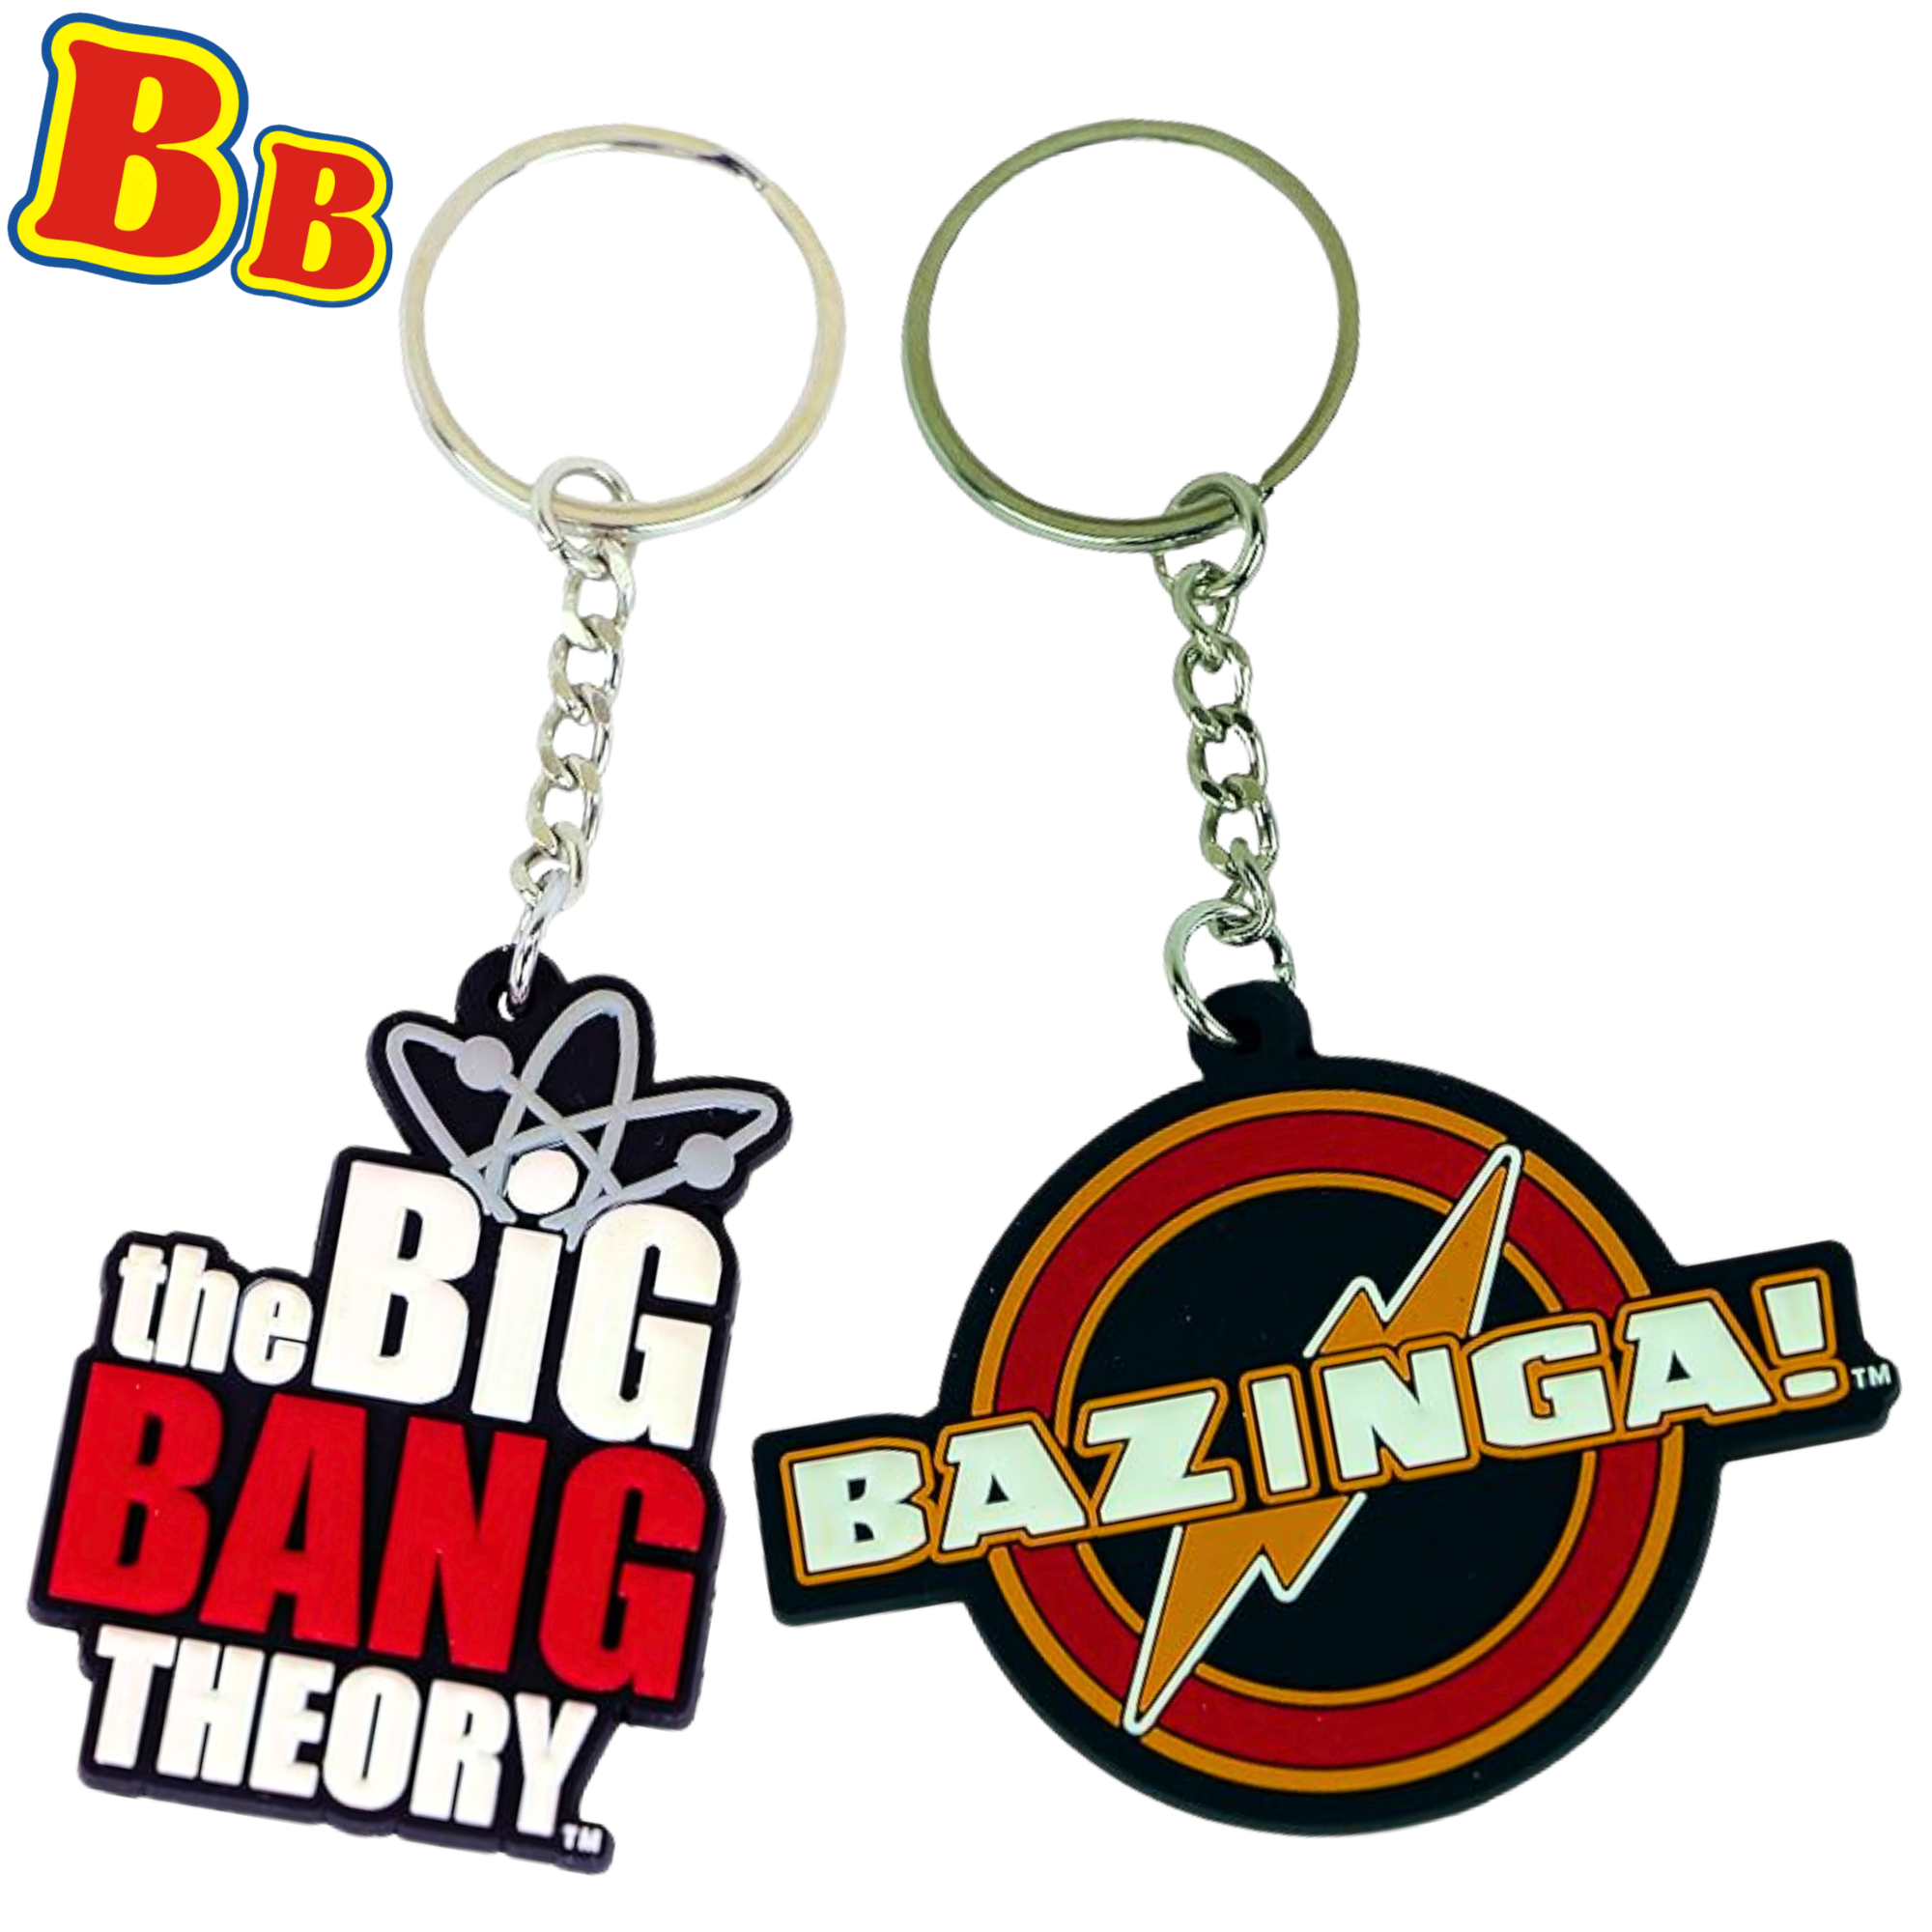 The Big Bang Theory Laser Cut Rubber Keychain Twin Pack - Includes Bazinga and Logo Designs - Toptoys2u